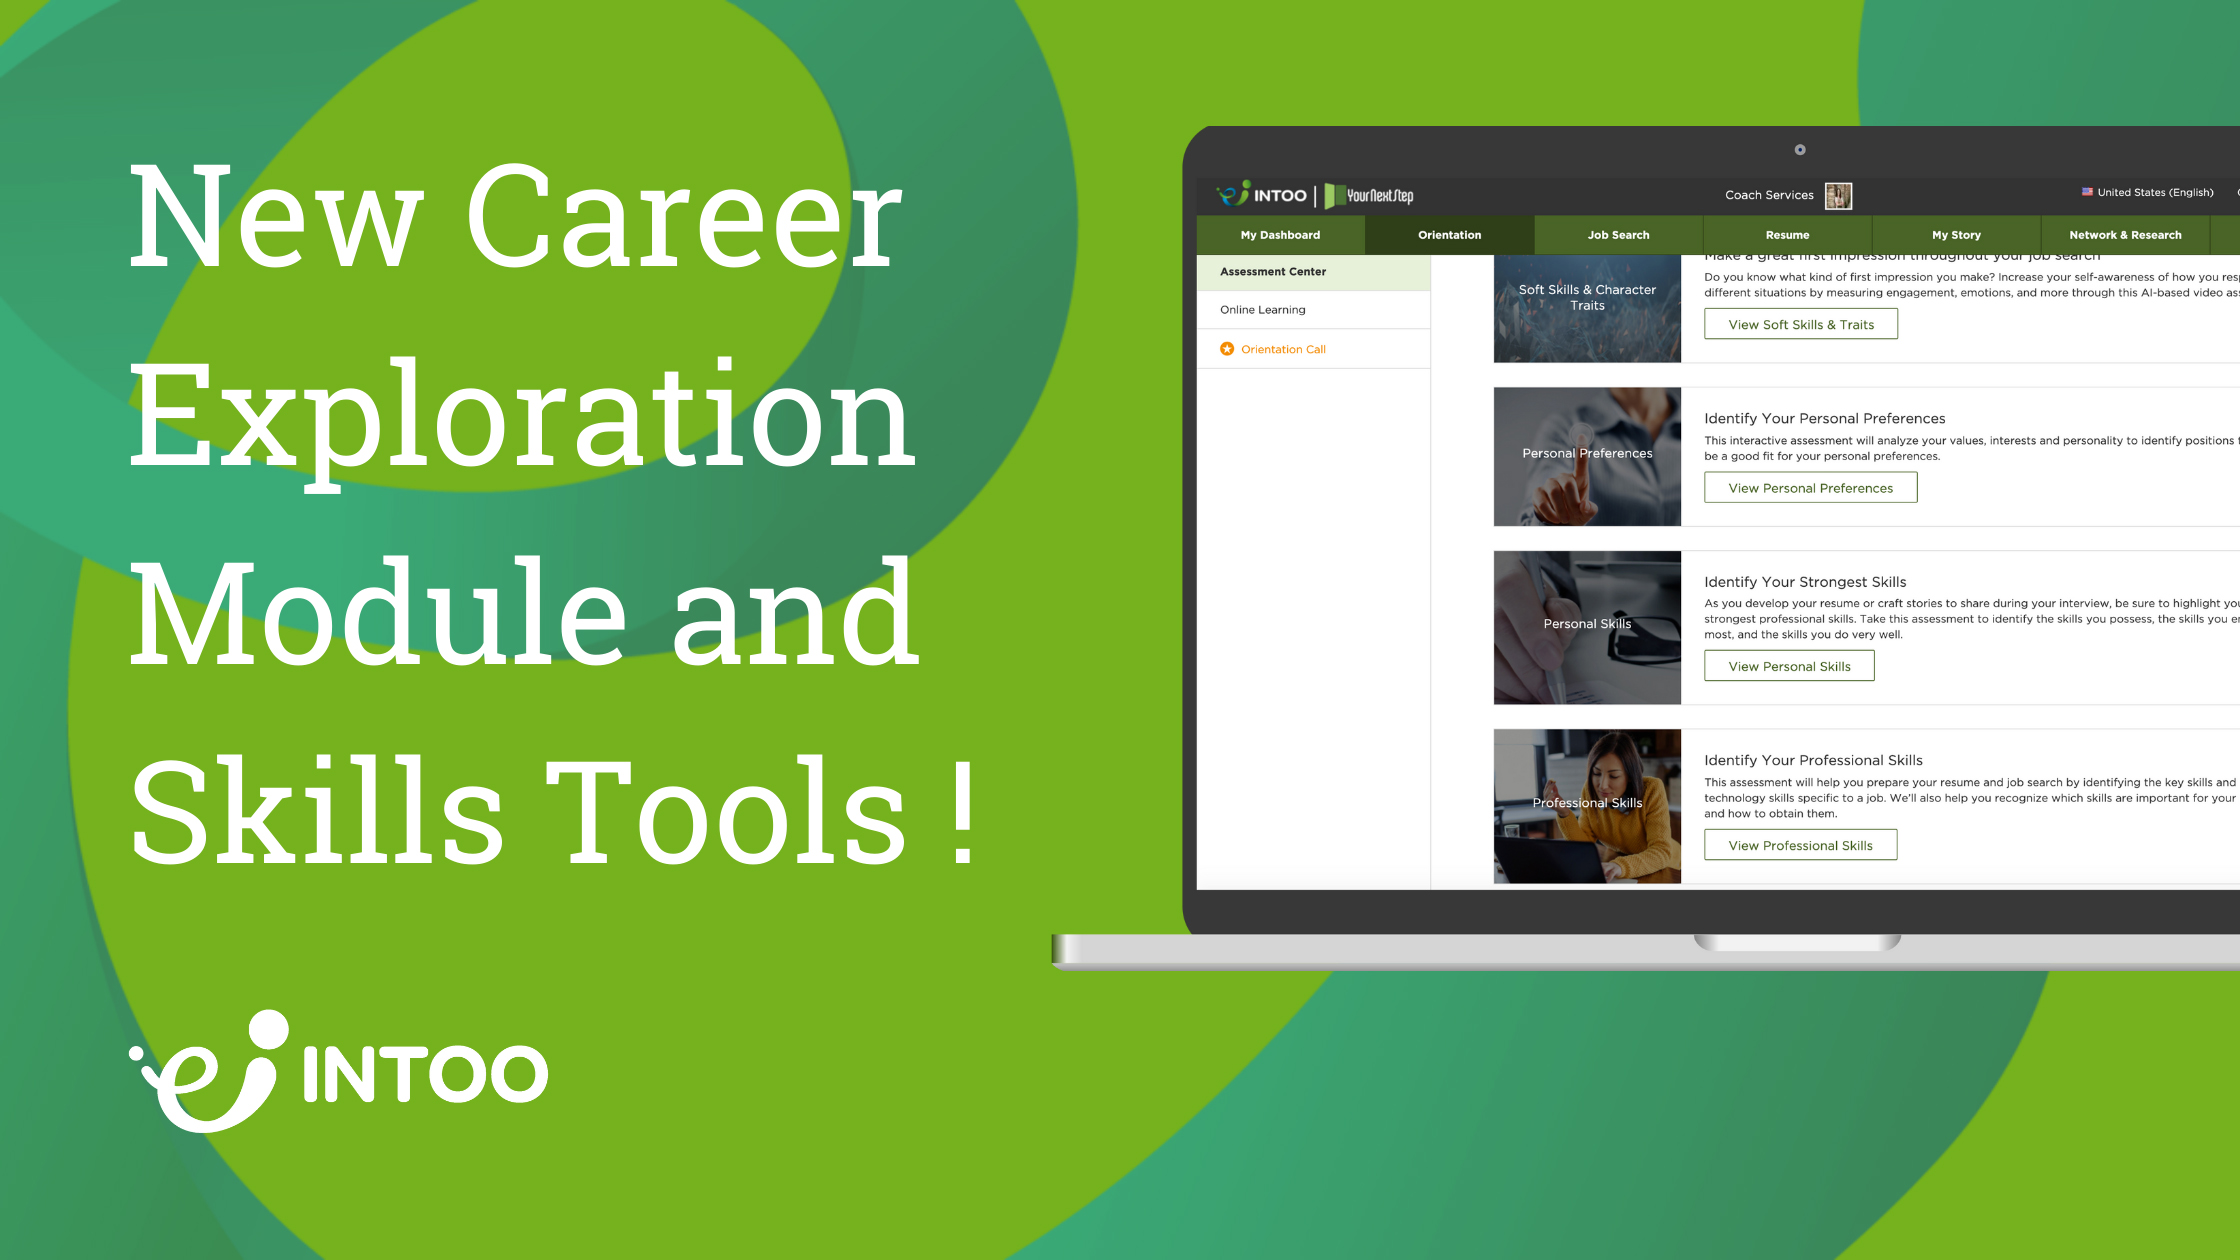 INTOO launches new career exploration module and skills tools, as shown in the platform screenshot